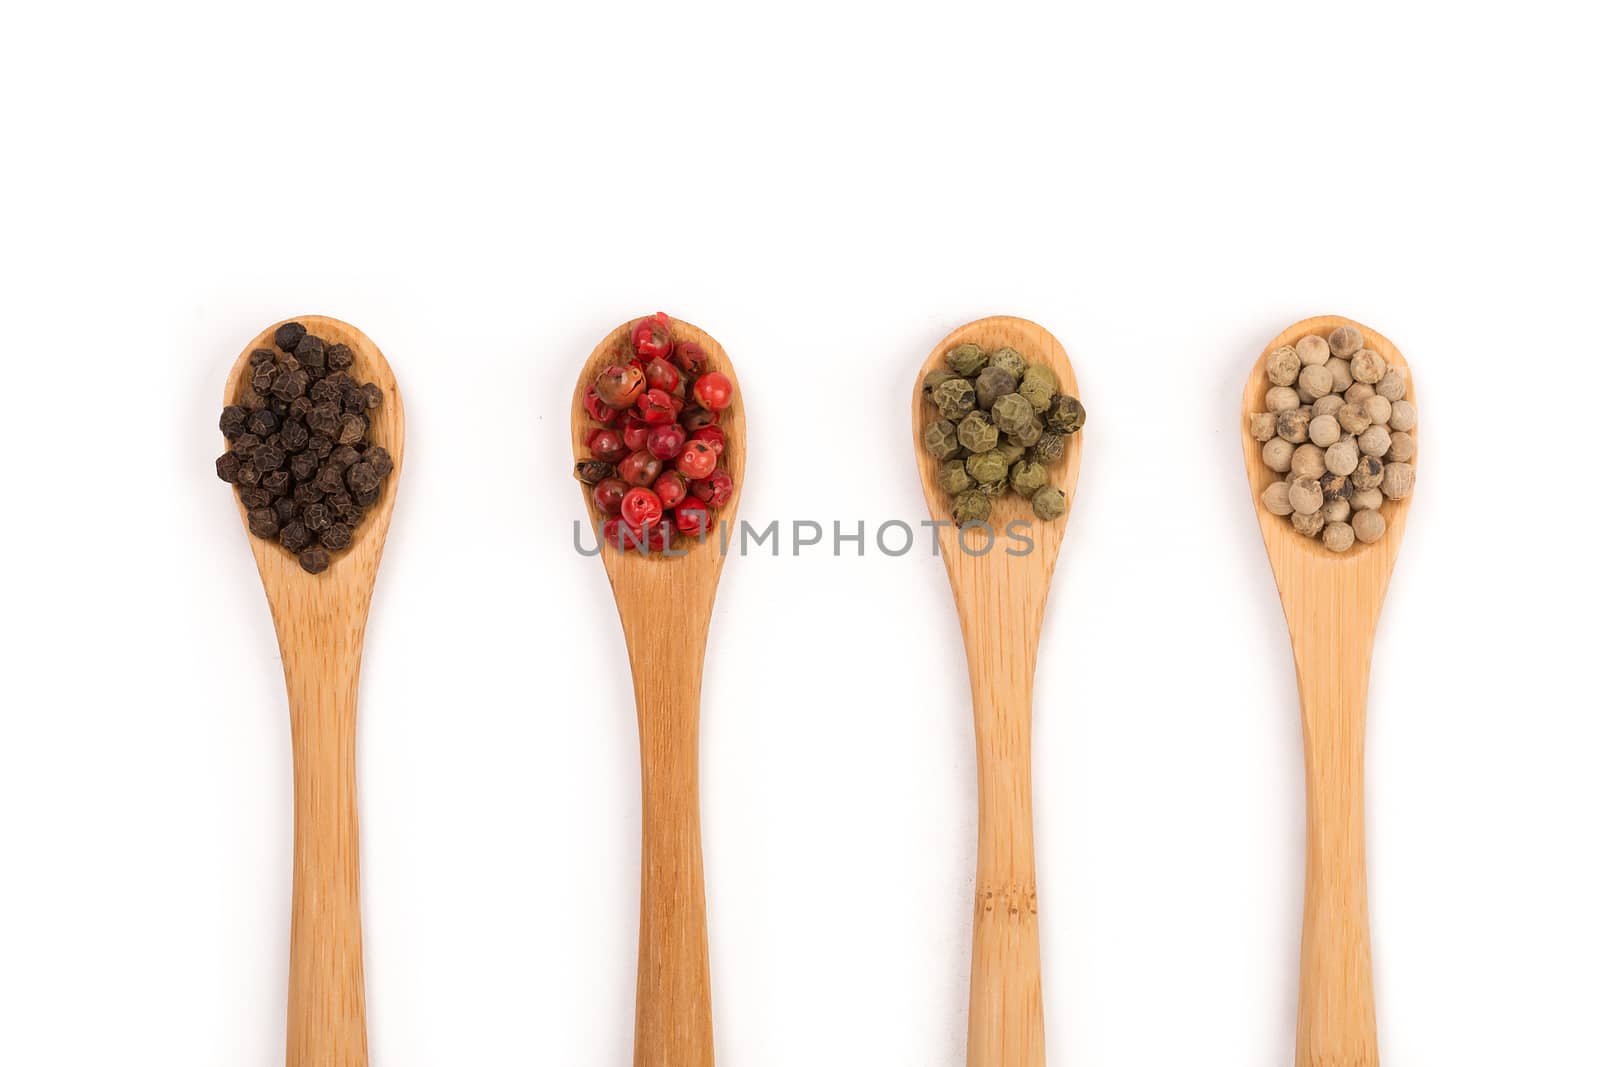 Wooden spoons with various pepper spice on white background.